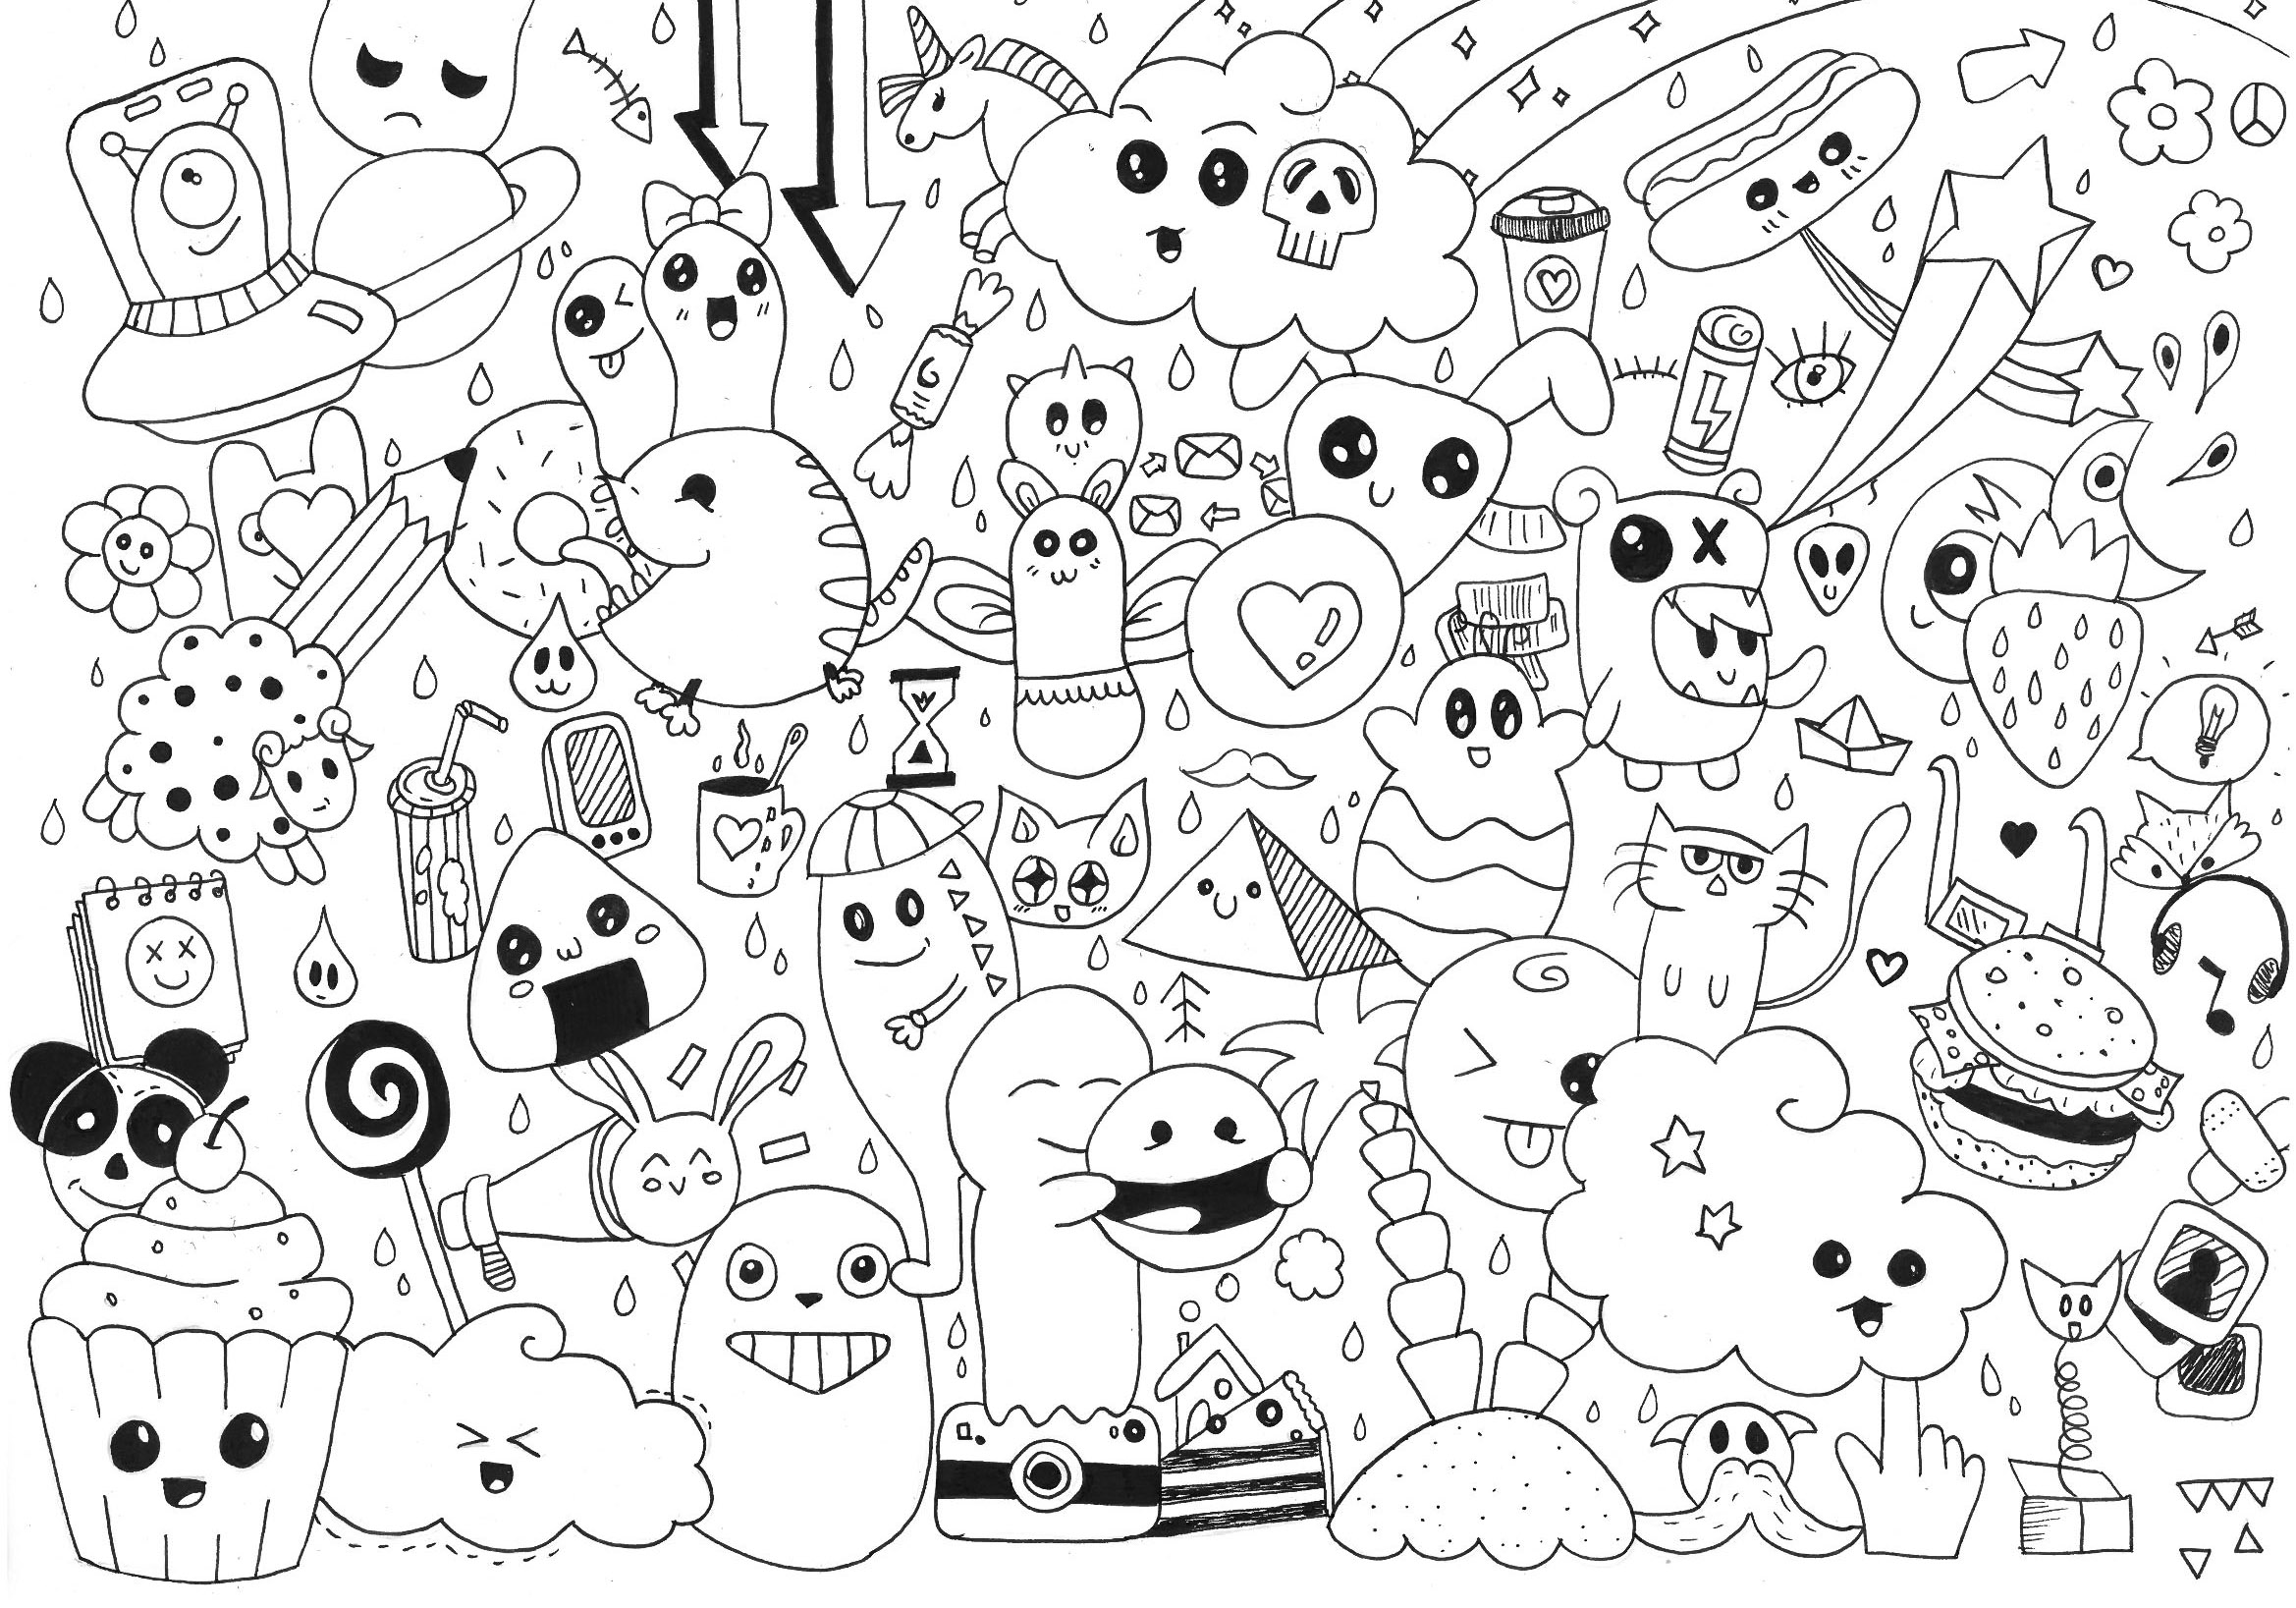 Doodle Coloring Pages For Adults Top Free Printable Coloring Pages For All